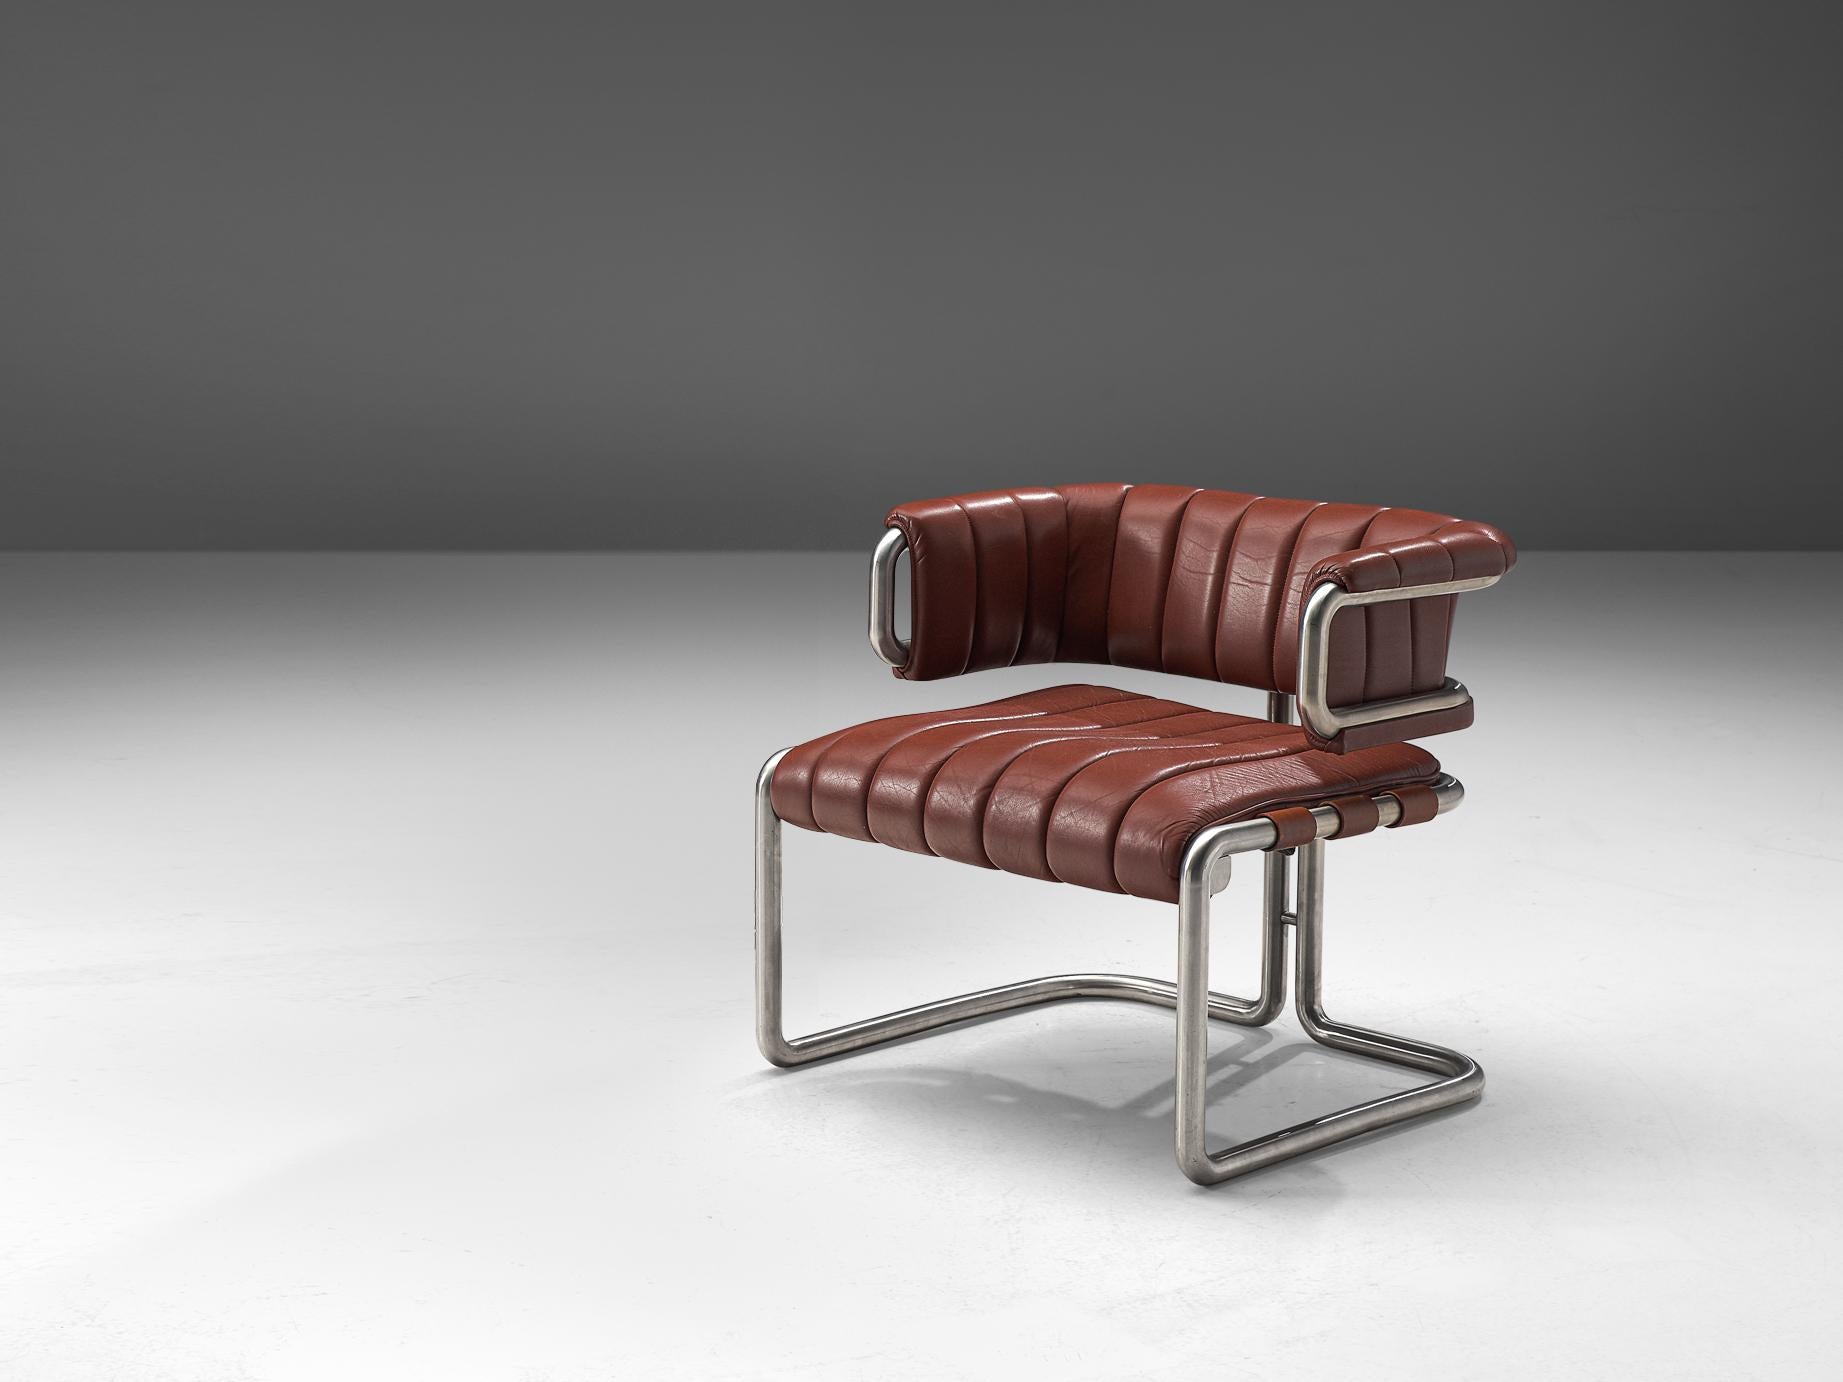 Lounge chair, leather and metal, Germany, 1960s

Dark red leather chair with metal tubular steel. This chair is characterized by clear, straight lines that are noticeable in the leather as well. The frame of the chair is made from high quality